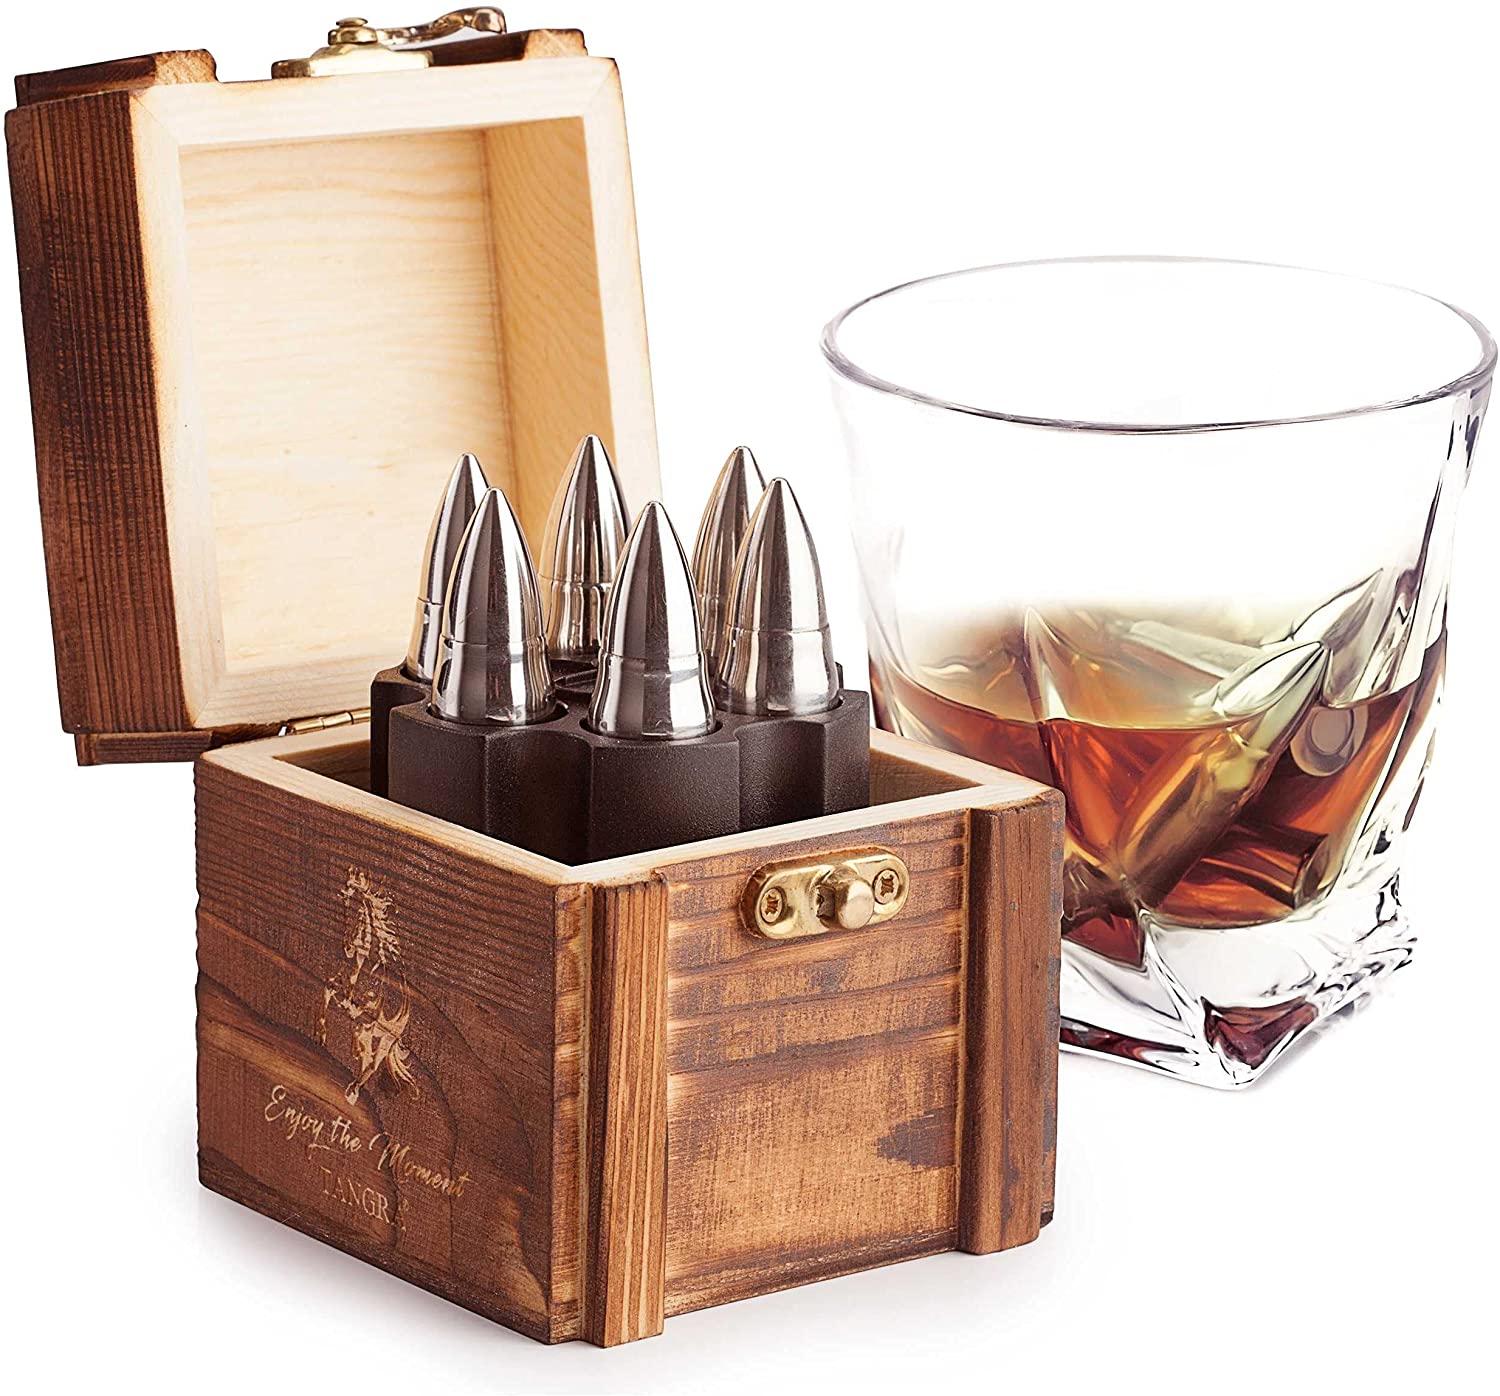 Excellent quality Beer Drinking Glass - Stainles steel bullet Whiskey Stones Gift Set custom ice cube stone gift set by wooden box – Shunstone